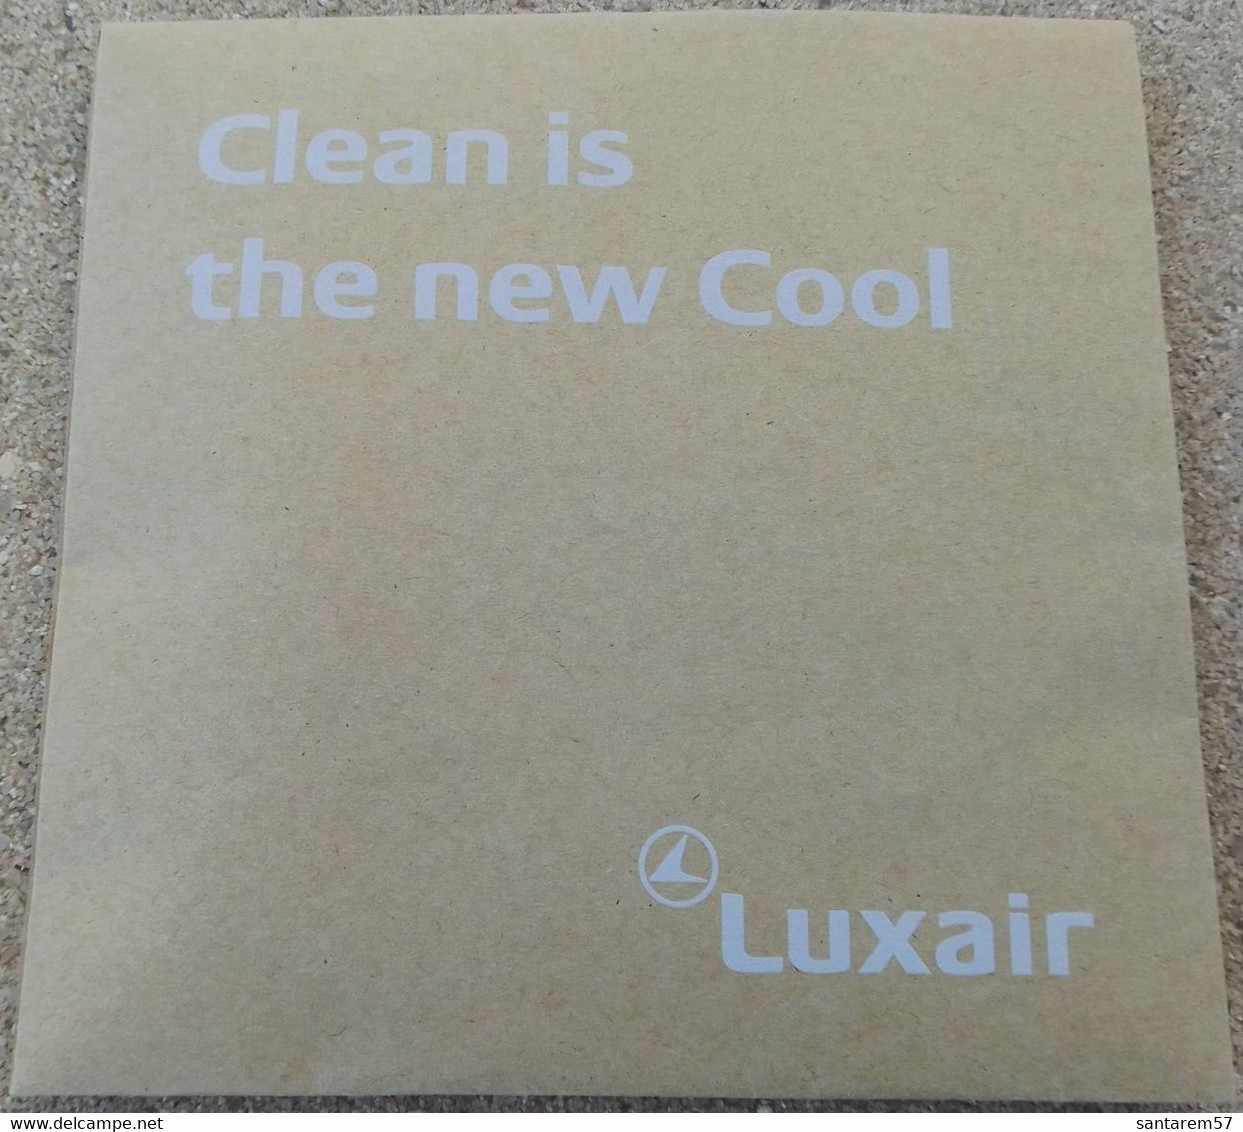 Luxair Pochette Traveller Kit Hygiène Clean Is The New Cool - Advertenties